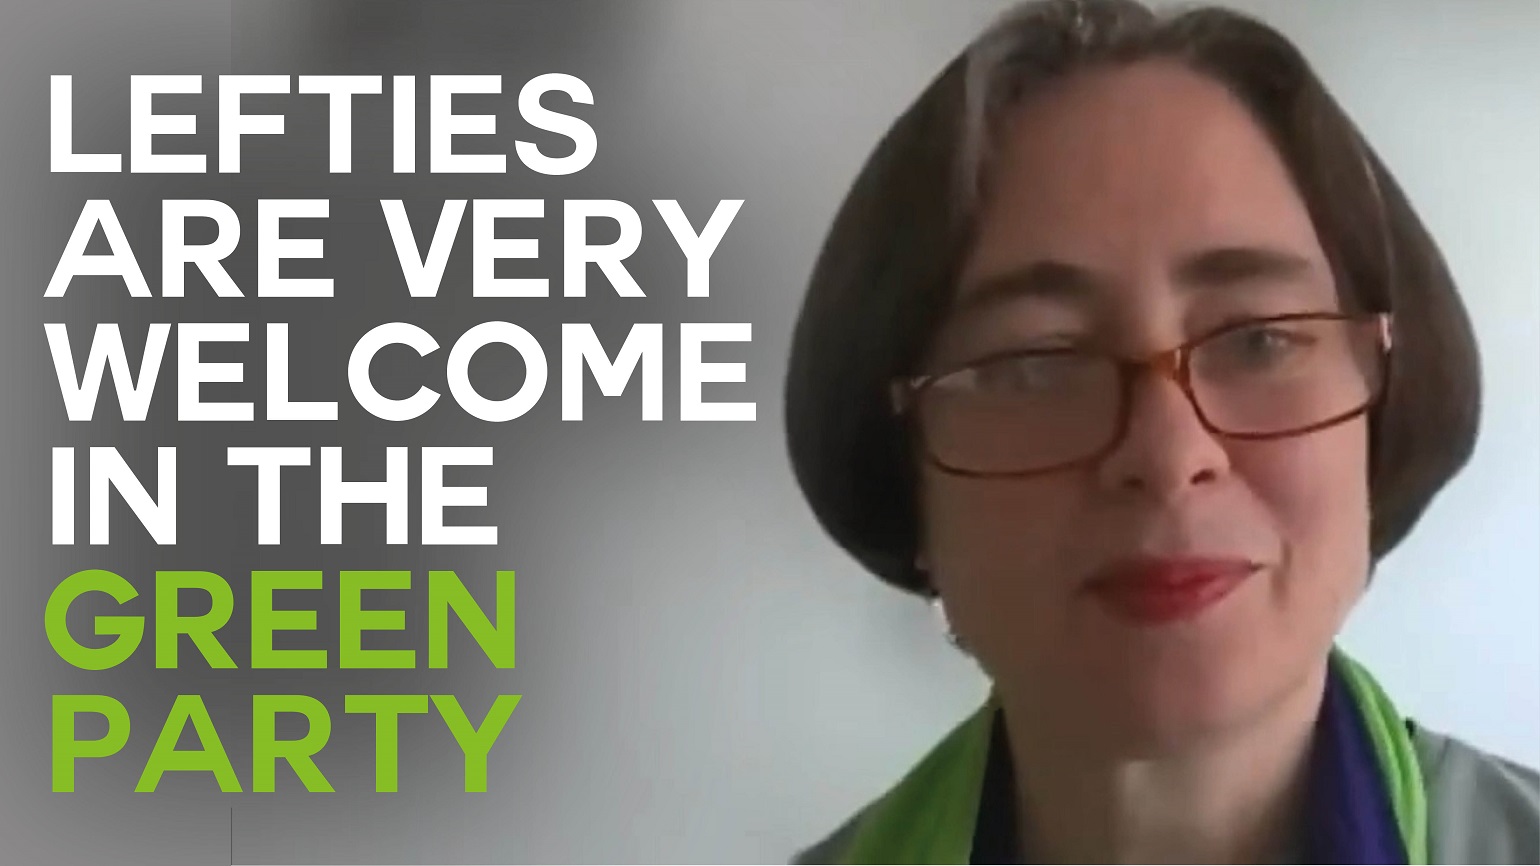 A still of an interview with Jo Bird with text overlaid reading "Lefties are very welcome in the Green Party"